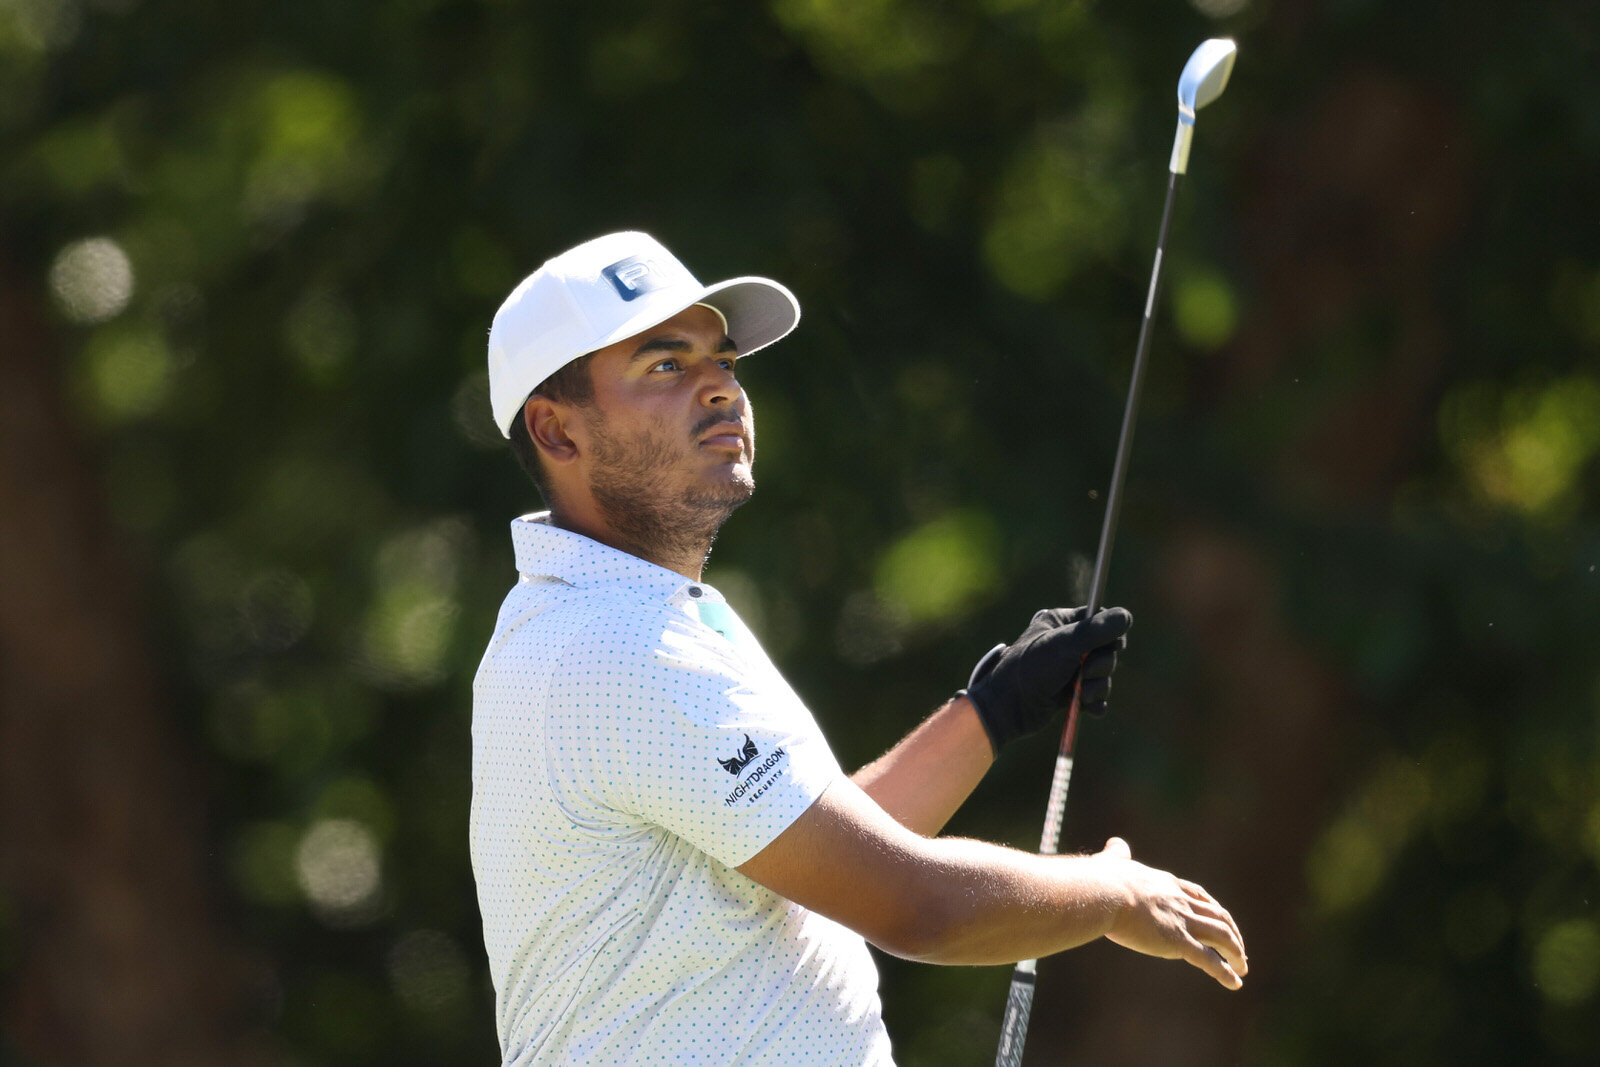  NORTON, MASSACHUSETTS - AUGUST 20:  Sebastian Munoz of Colombia plays his shot from the tenth tee during the first round of The Northern Trust at TPC Boston on August 20, 2020 in Norton, Massachusetts. (Photo by Rob Carr/Getty Images) 